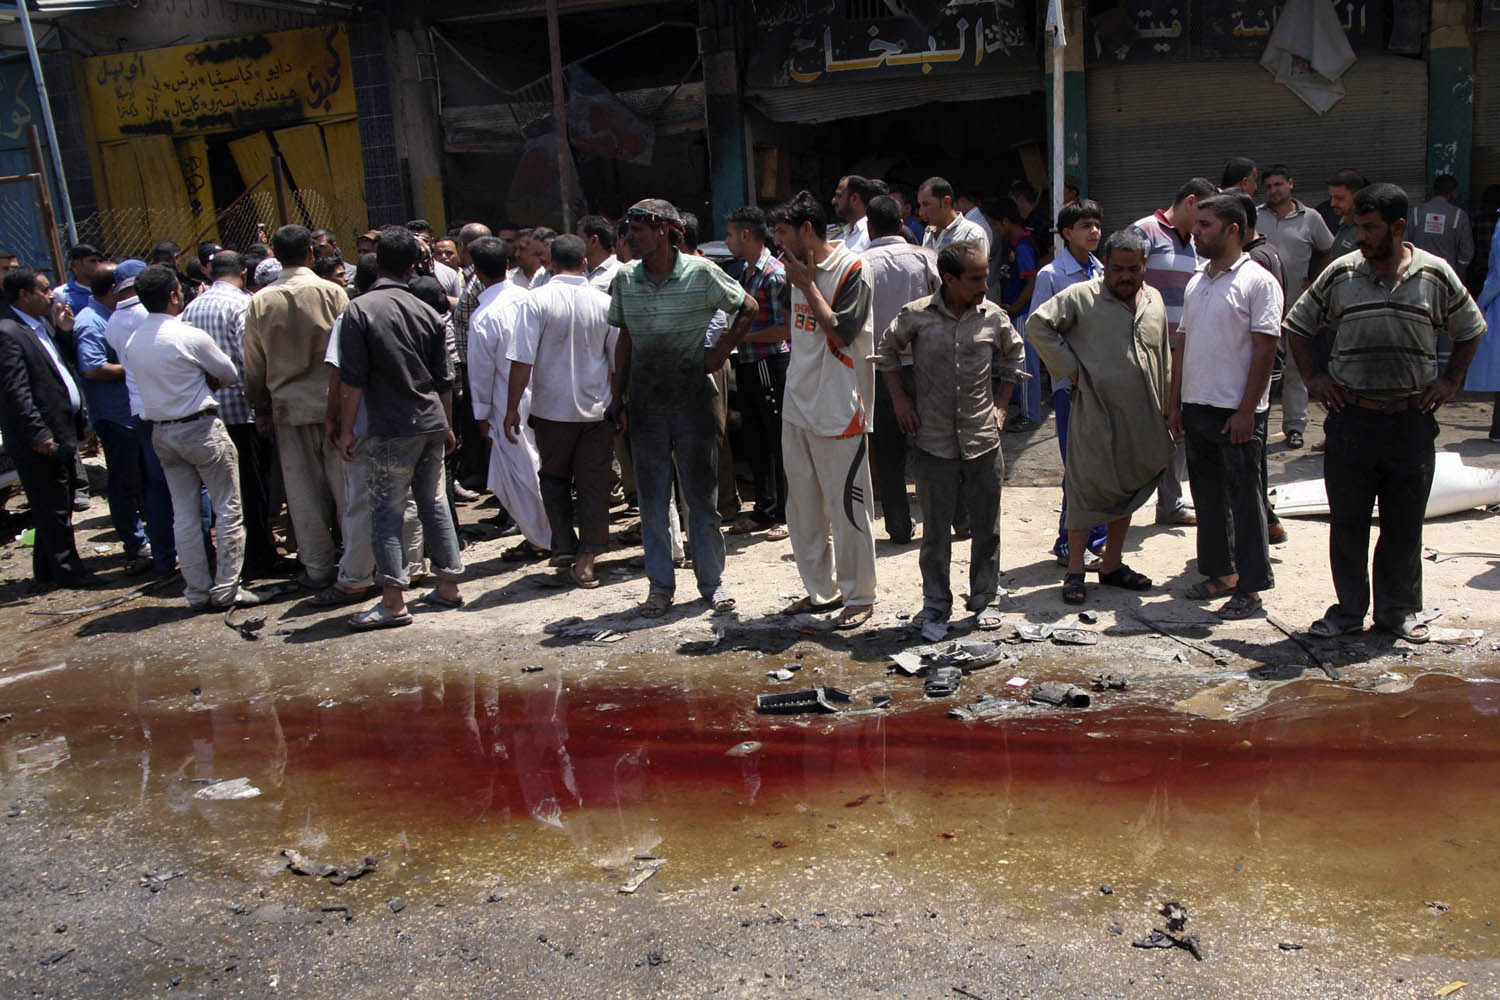 Residents look at a pool of blood after a car bomb attack in Kerbala